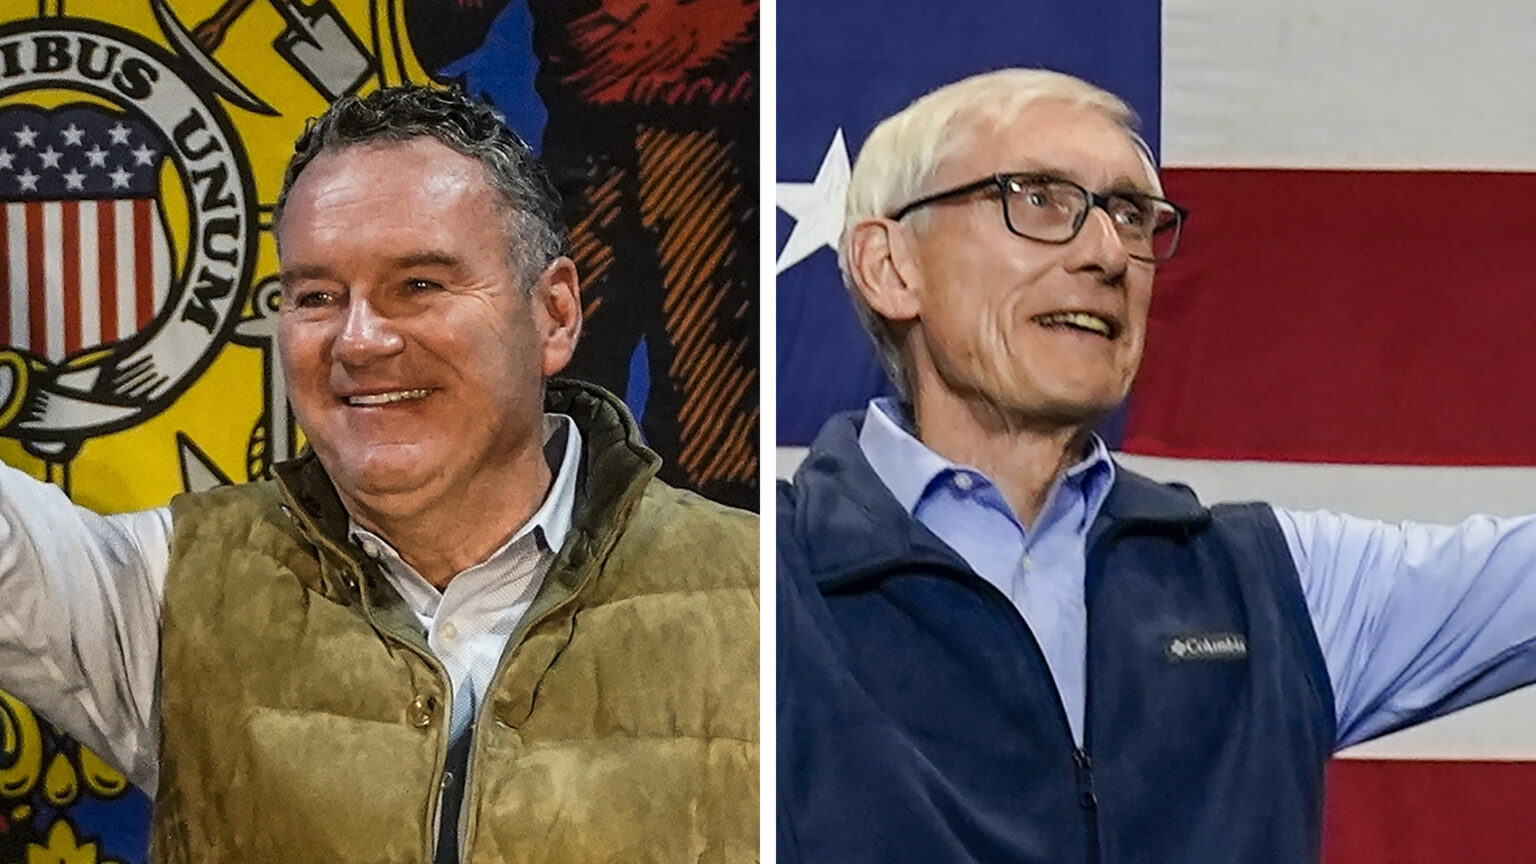 Side-by-side close-up photos show Tim Michels (left) holding up his right arm and smiling in front of a Wisconsin flag and Tony Evers (right) holding up his oeft arm and smiling in front of a U.S. flag.